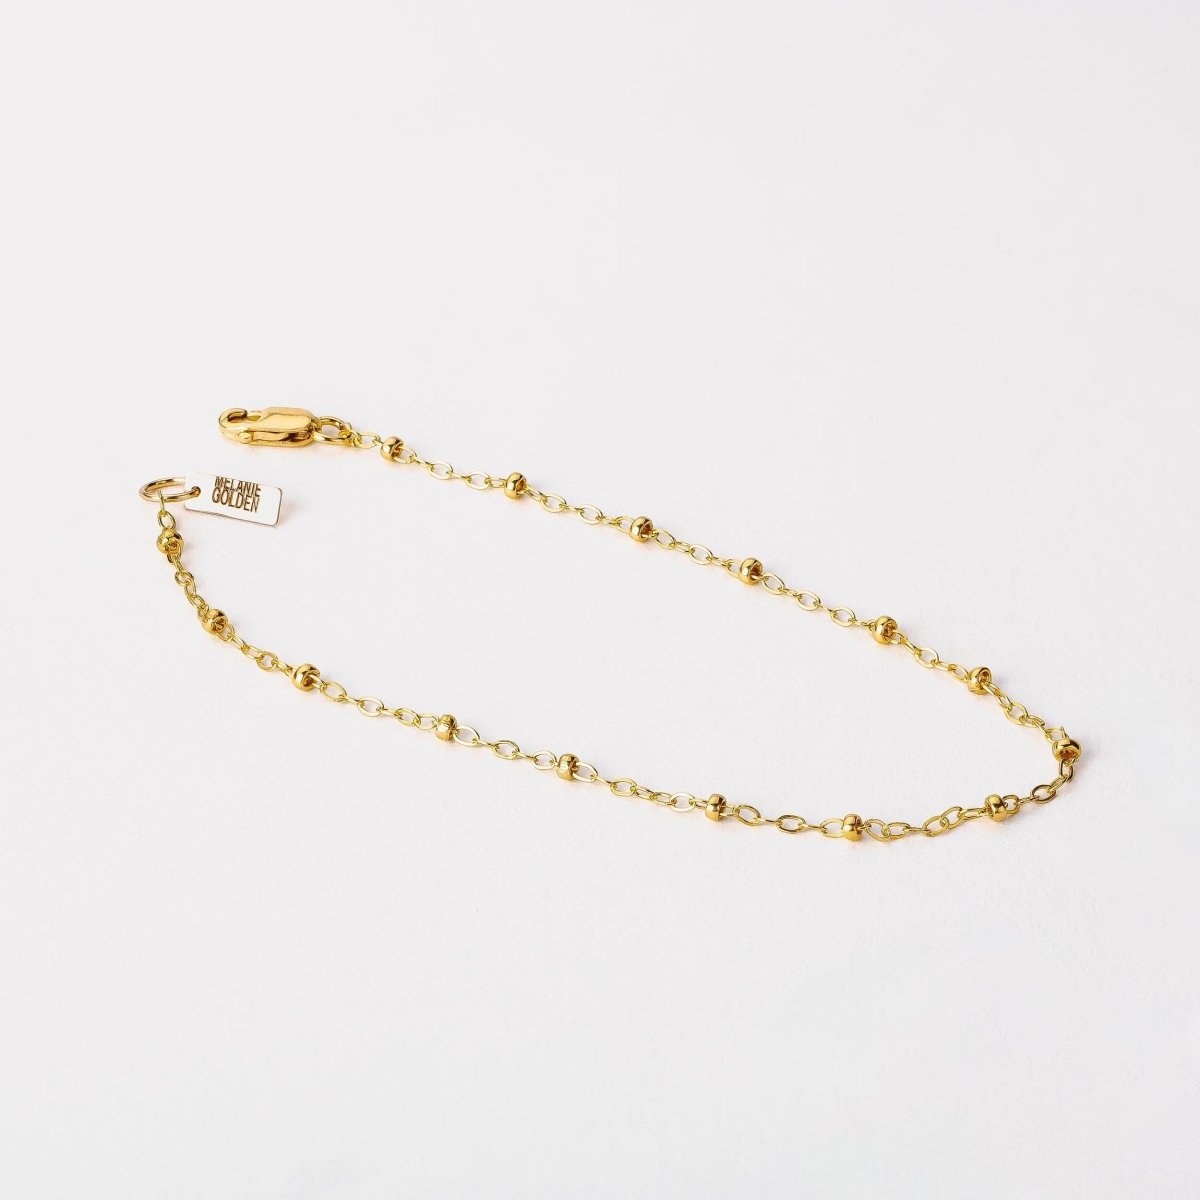 Satellite Chain Anklet - Melanie Golden Jewelry - _badge_new, anklets, celestial, chain anklets, everyday essentials, new